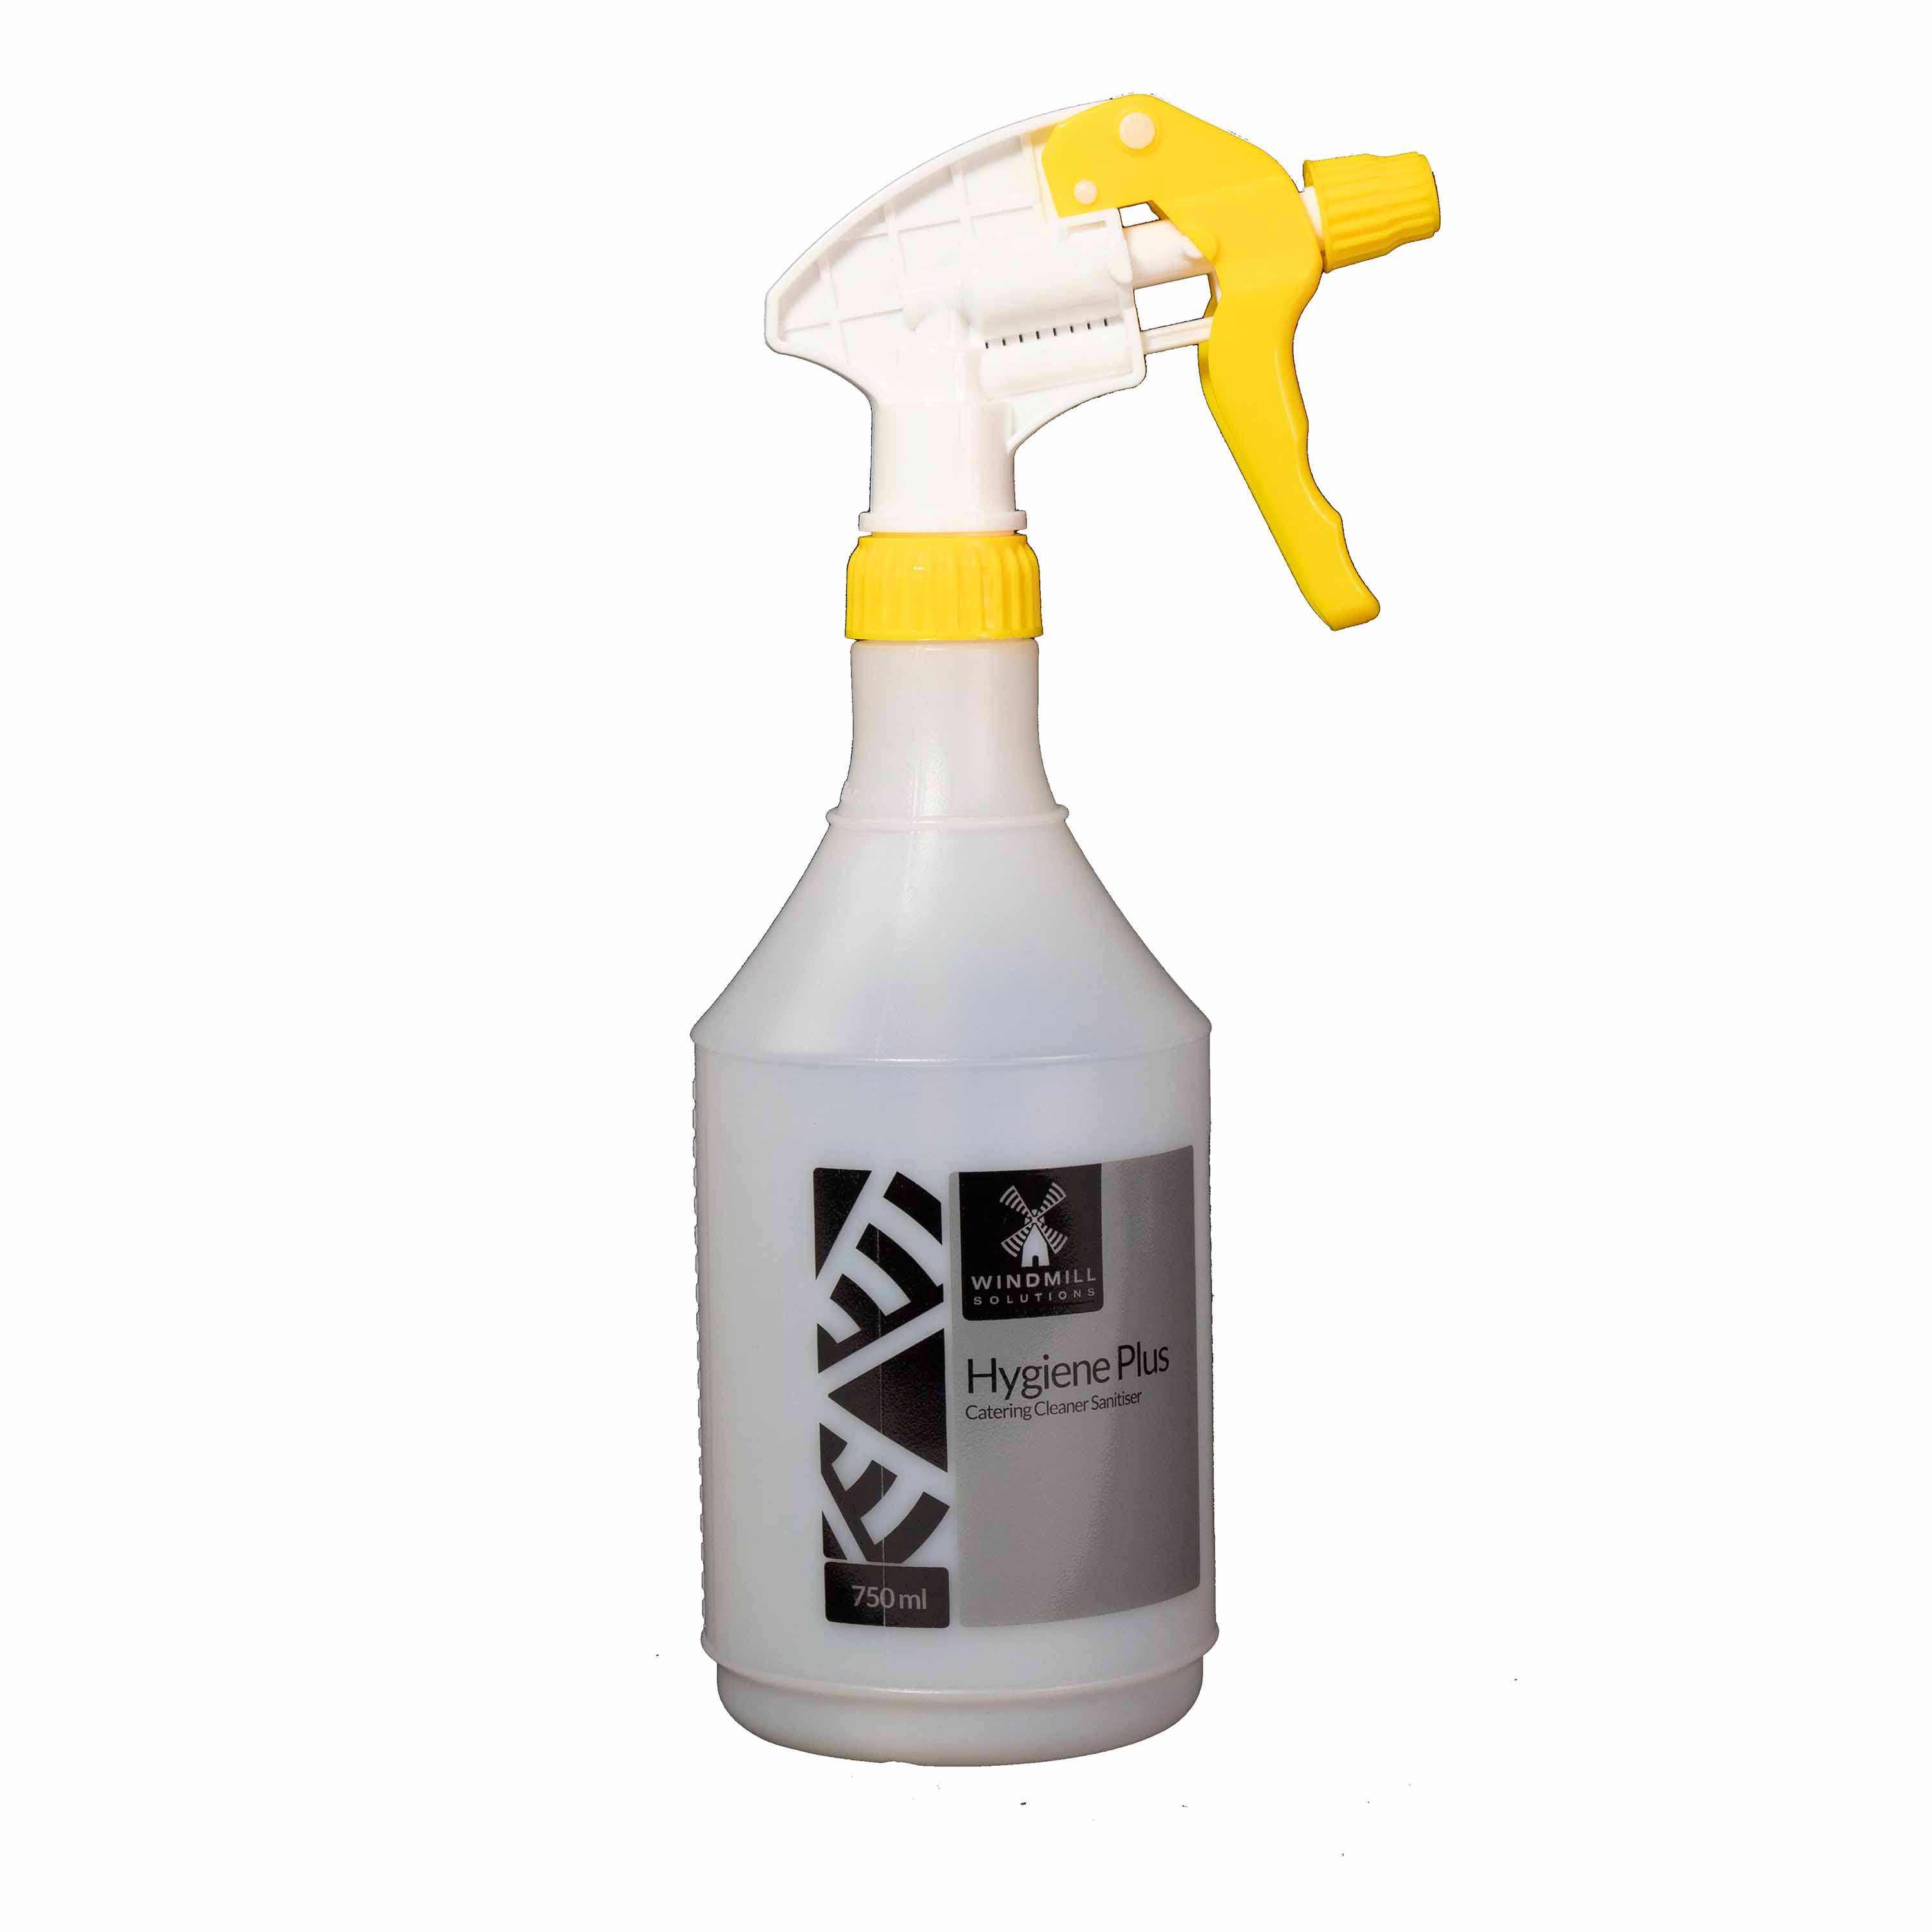 Windmill Hygiene Plus Cleaner 750ml Screen Printed Trigger Spray Complete with Yellow Trigger Spray